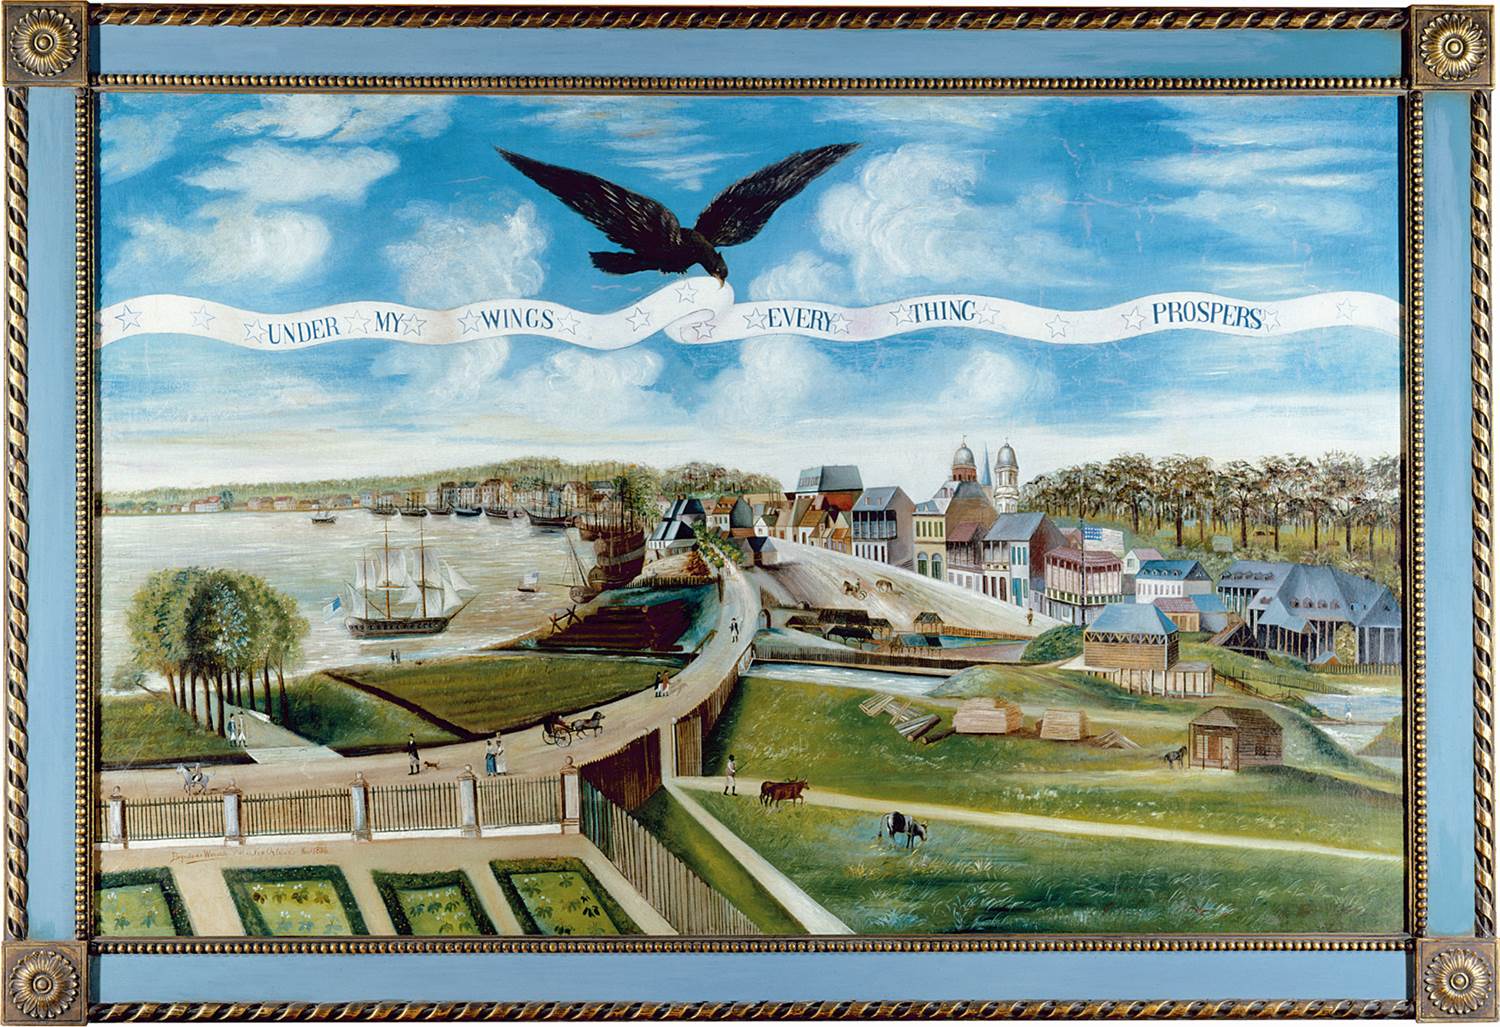 This painting depicts New Orleans in 1803, when the city was acquired—along with much of the modern 